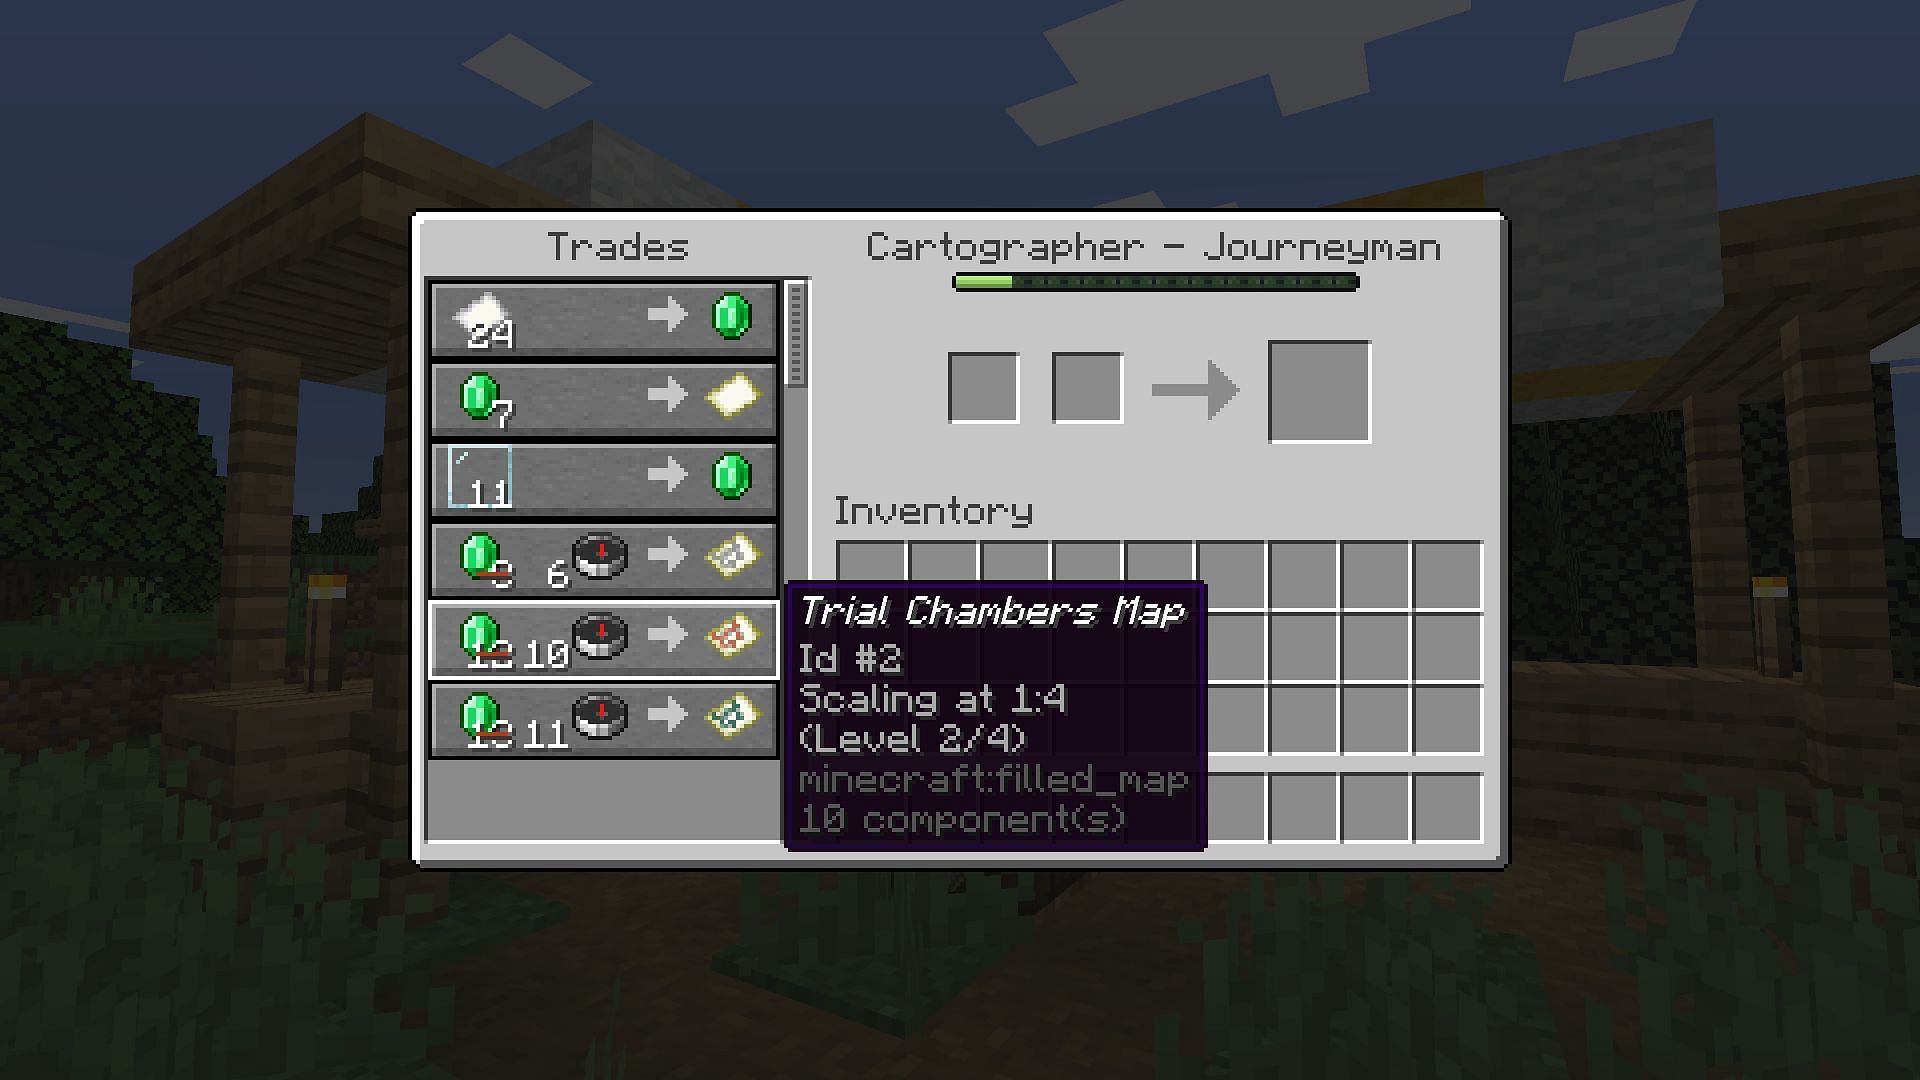 Trial chambers explorer map trade offered by cartographer (Image via Mojang)